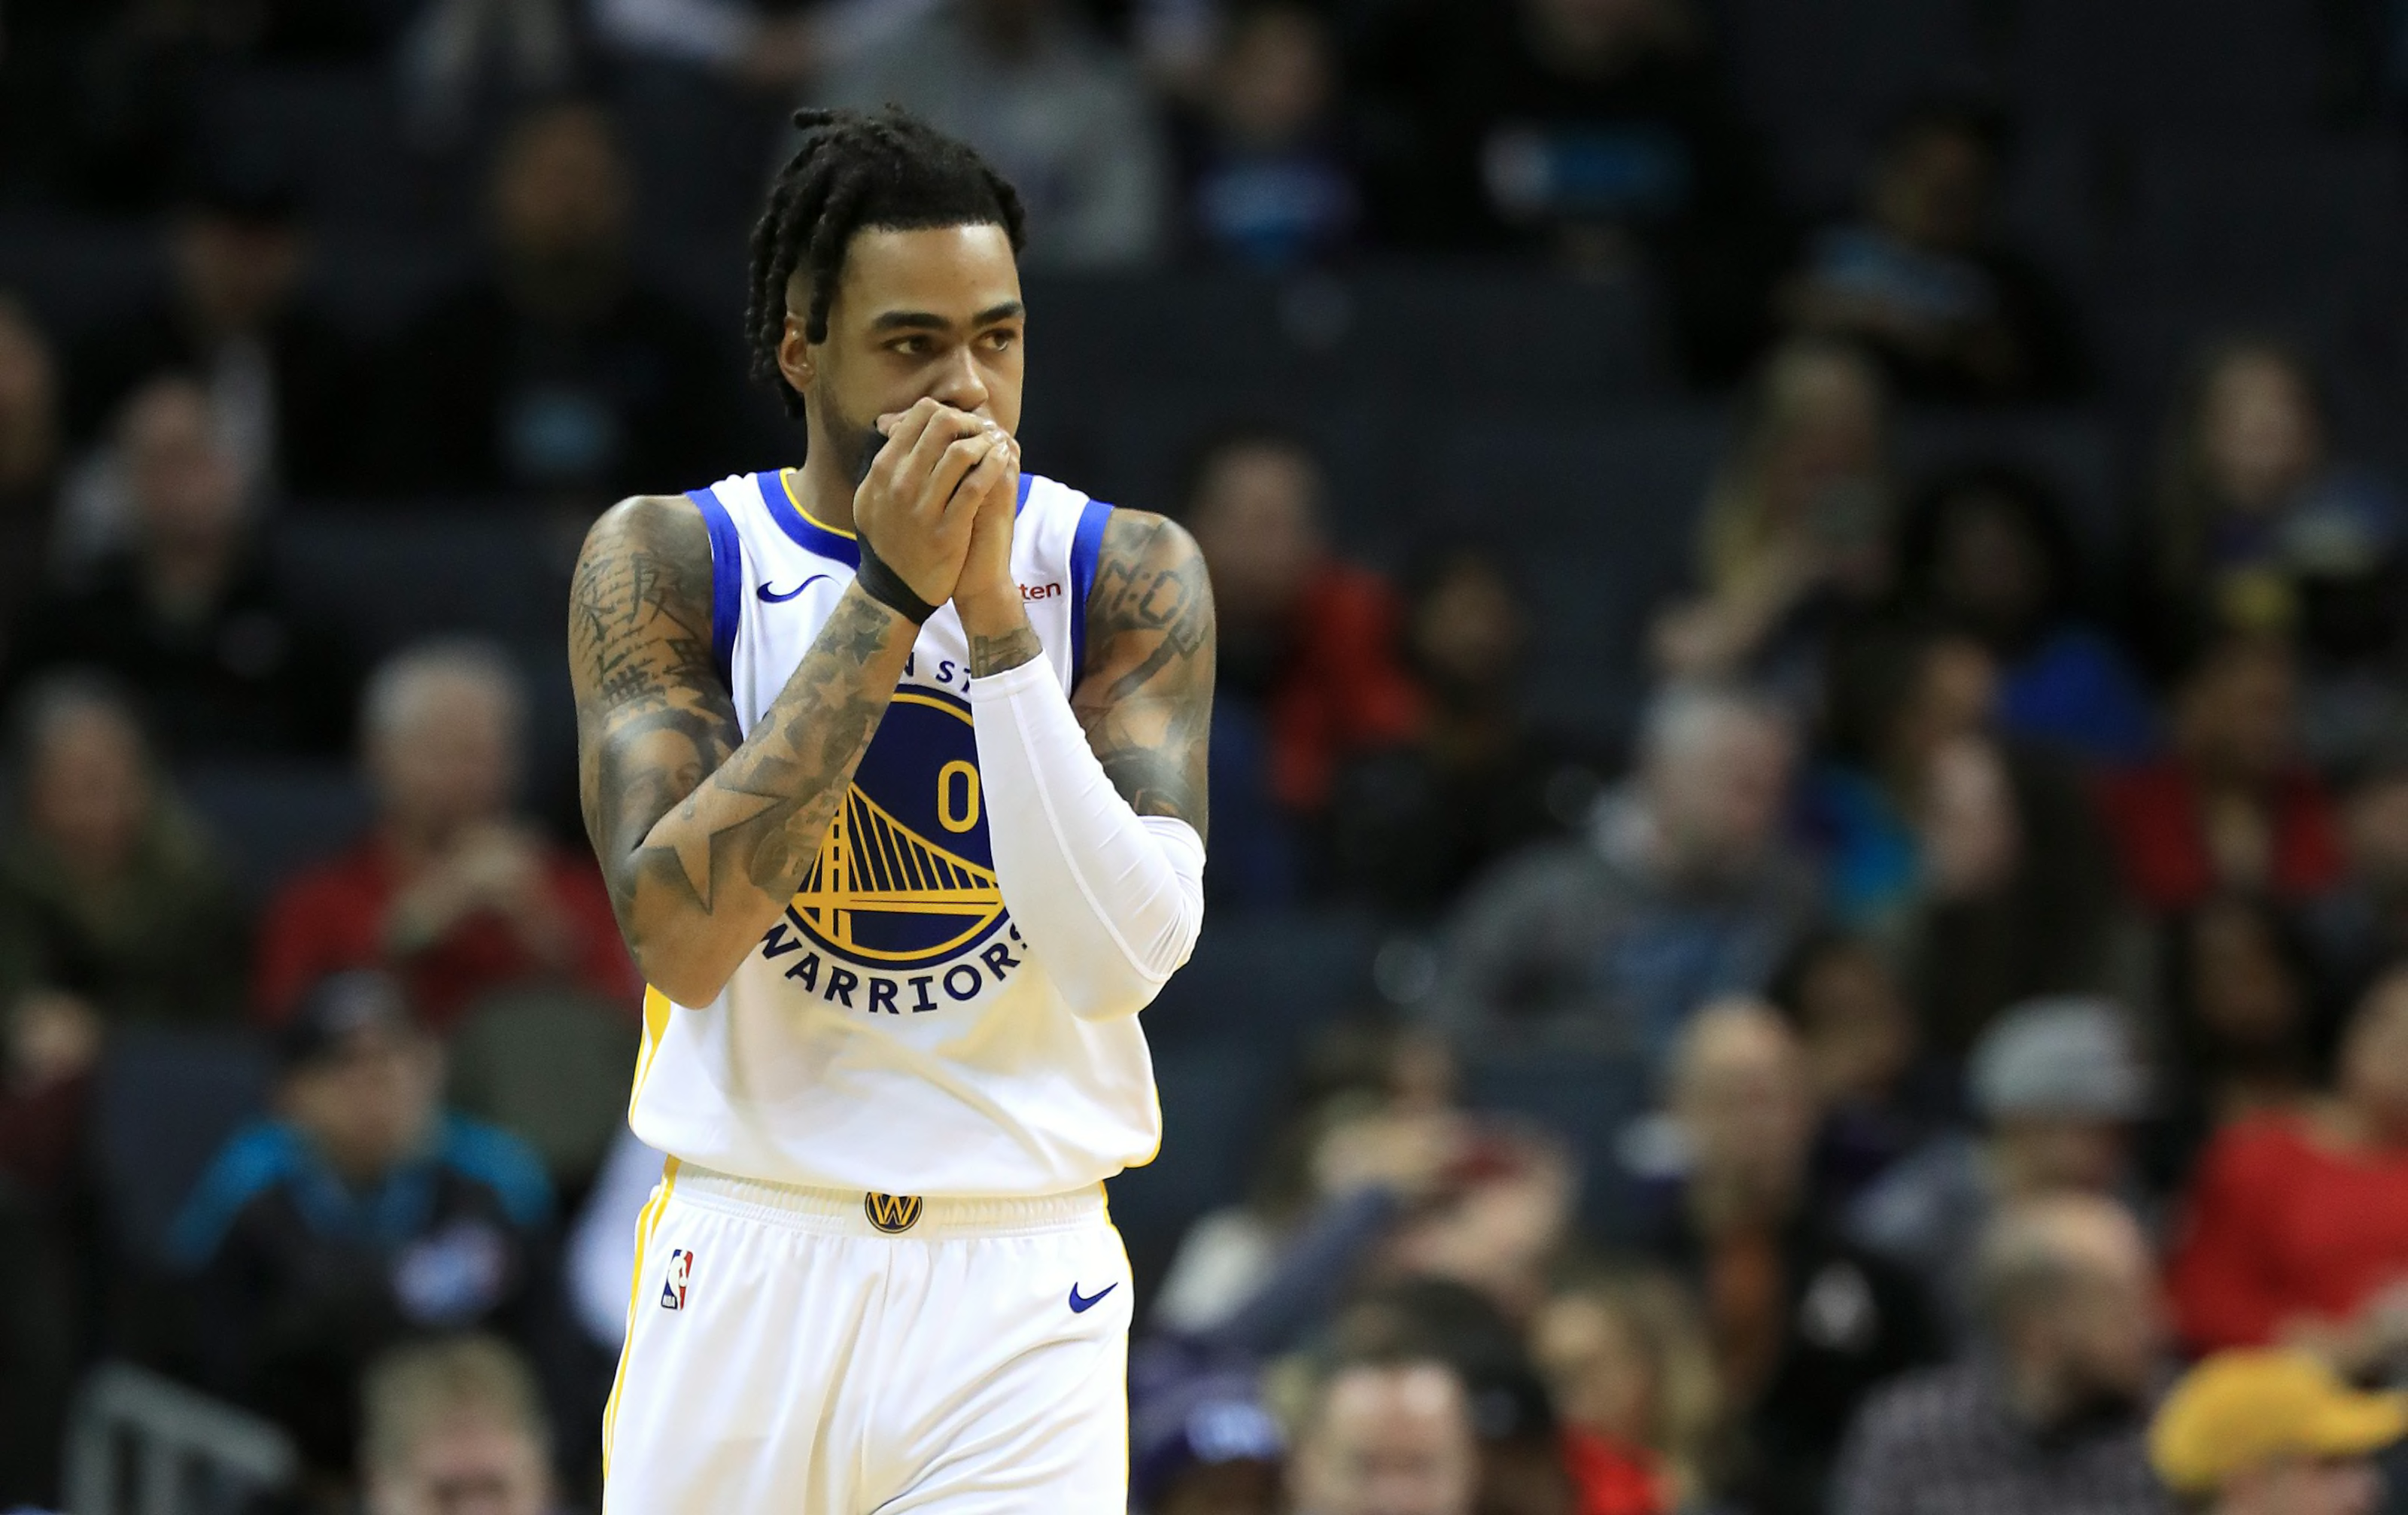 D'Angelo Russell Traded for Andrew Wiggins! 2019-20 NBA Season 